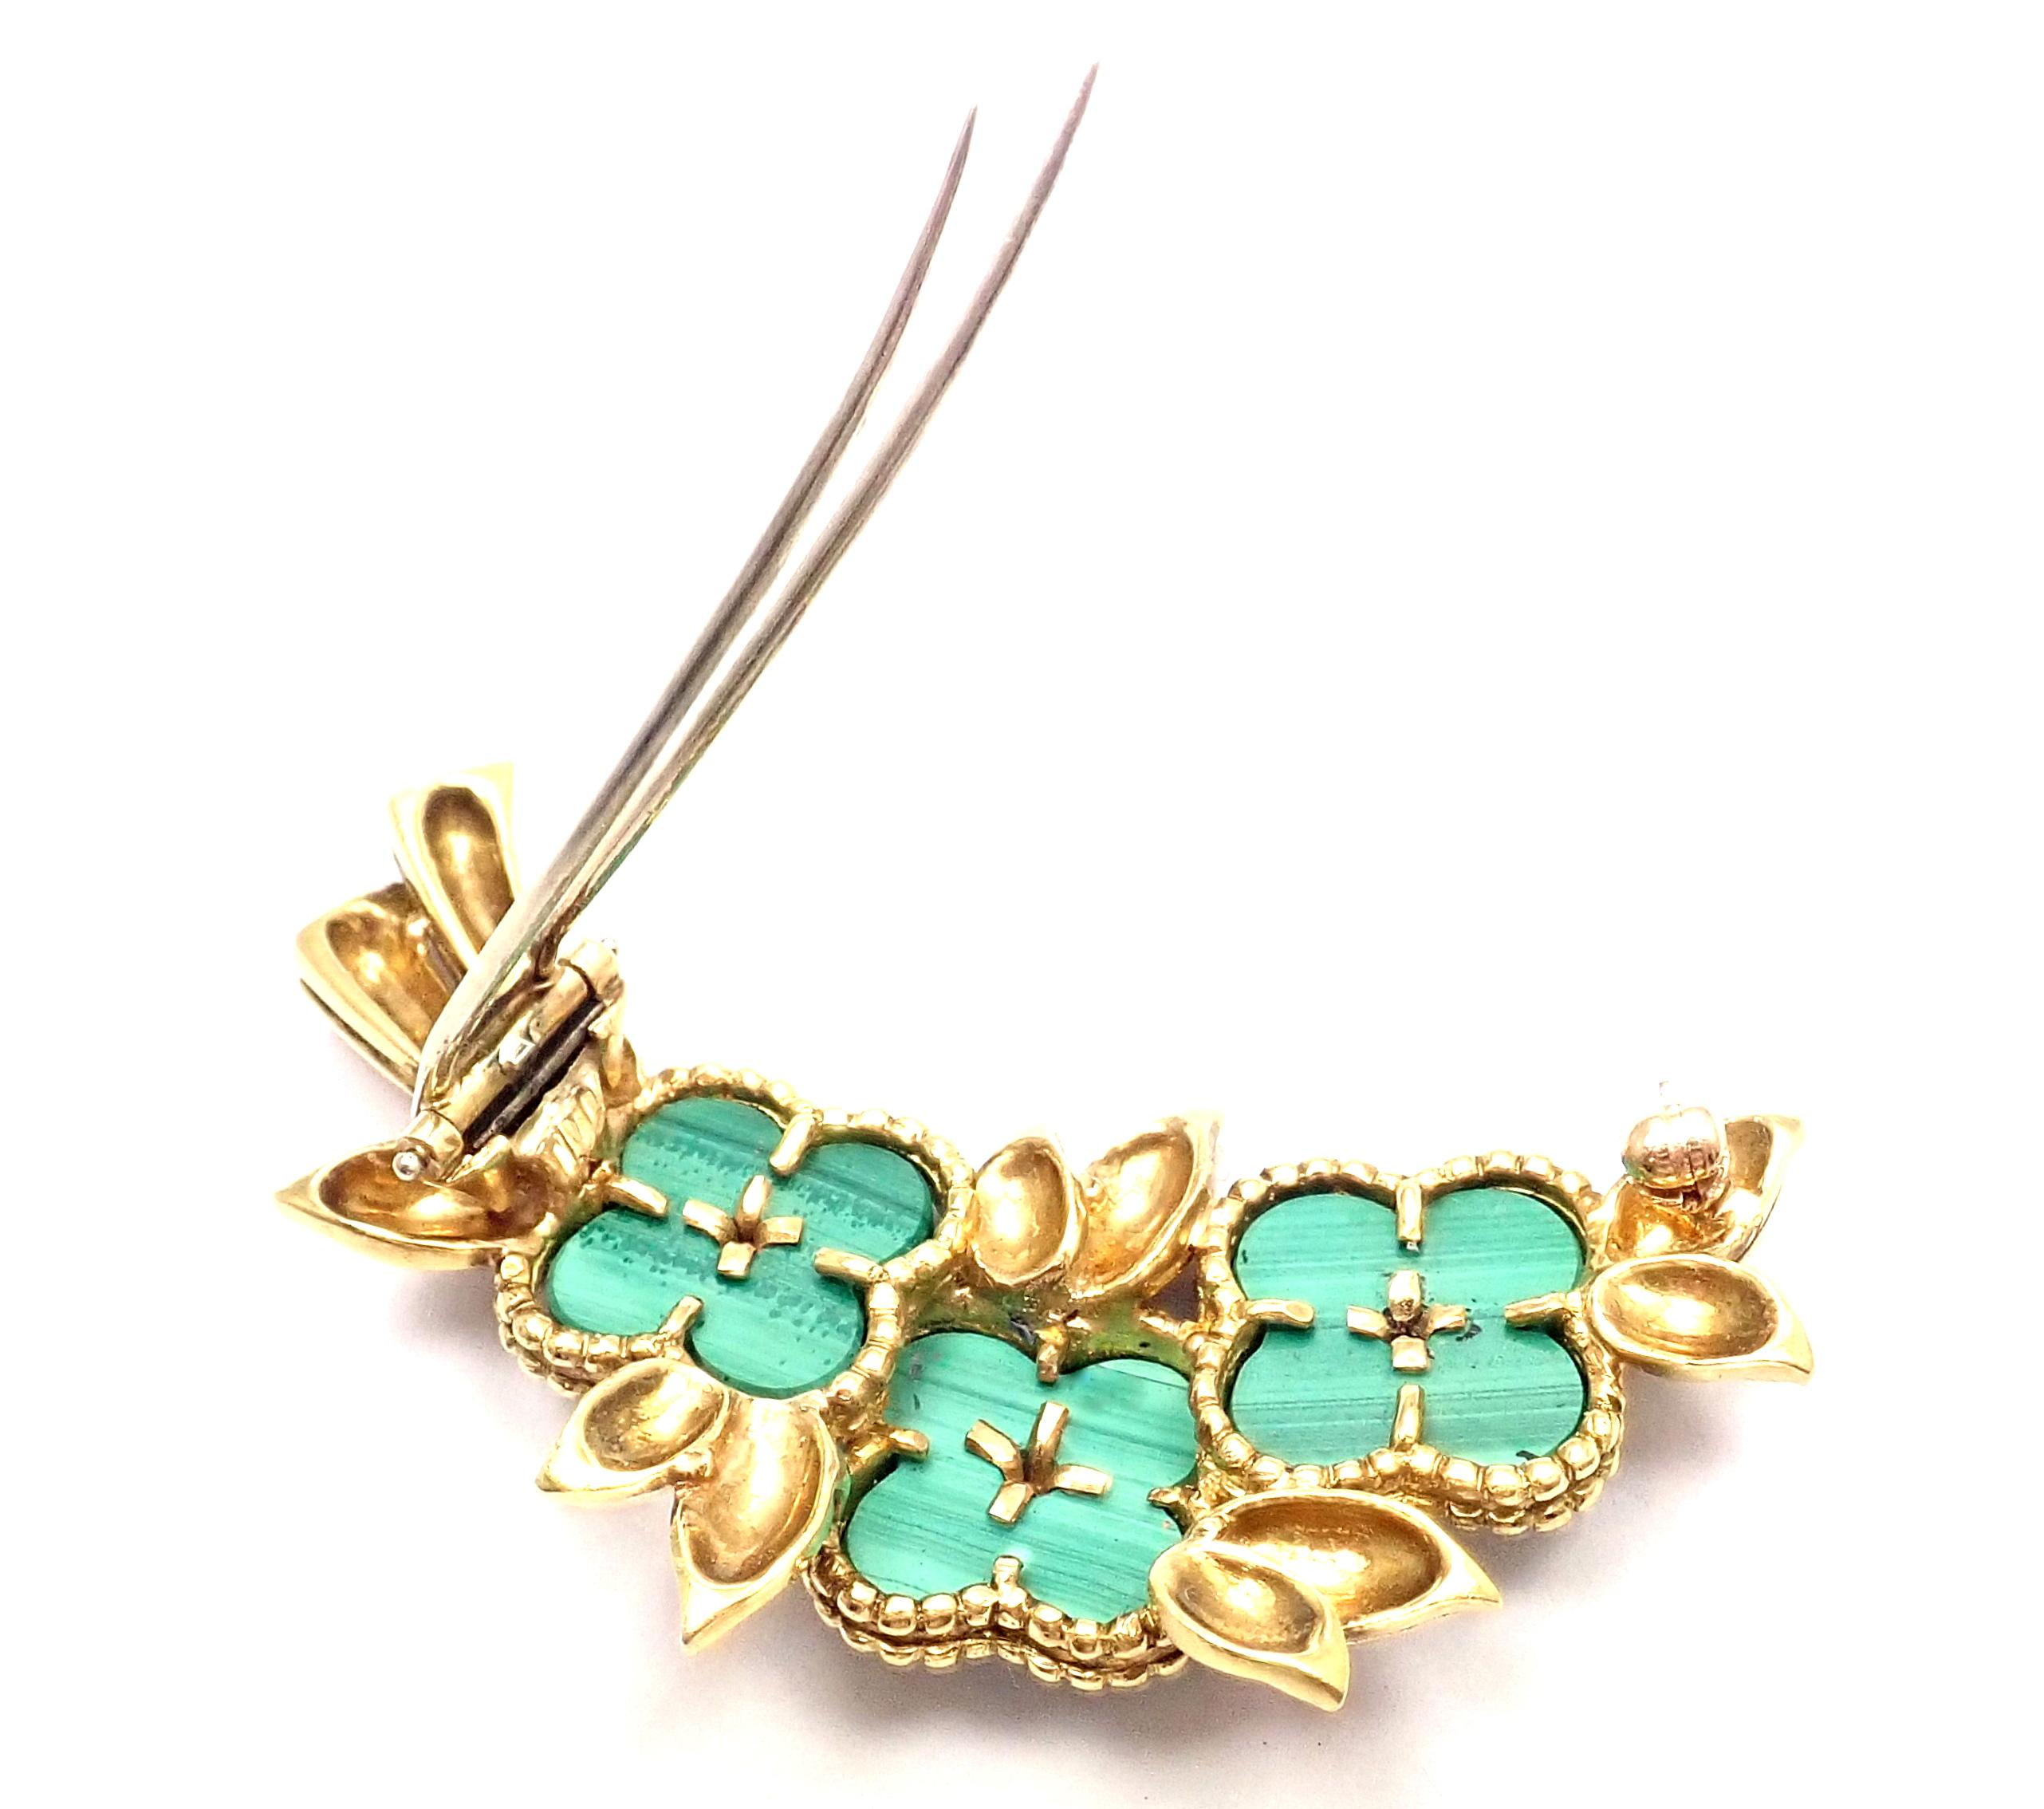 18k Yellow Gold Diamond Malachite Alhambra Pin Brooch by Van Cleef & Arpels. 
With 3 brilliant round cut diamonds VVS1 clarity, F color total weight approx. .18ct
3 alhambra shape malachite stones 15mm each
Details: 
Measurements: 2